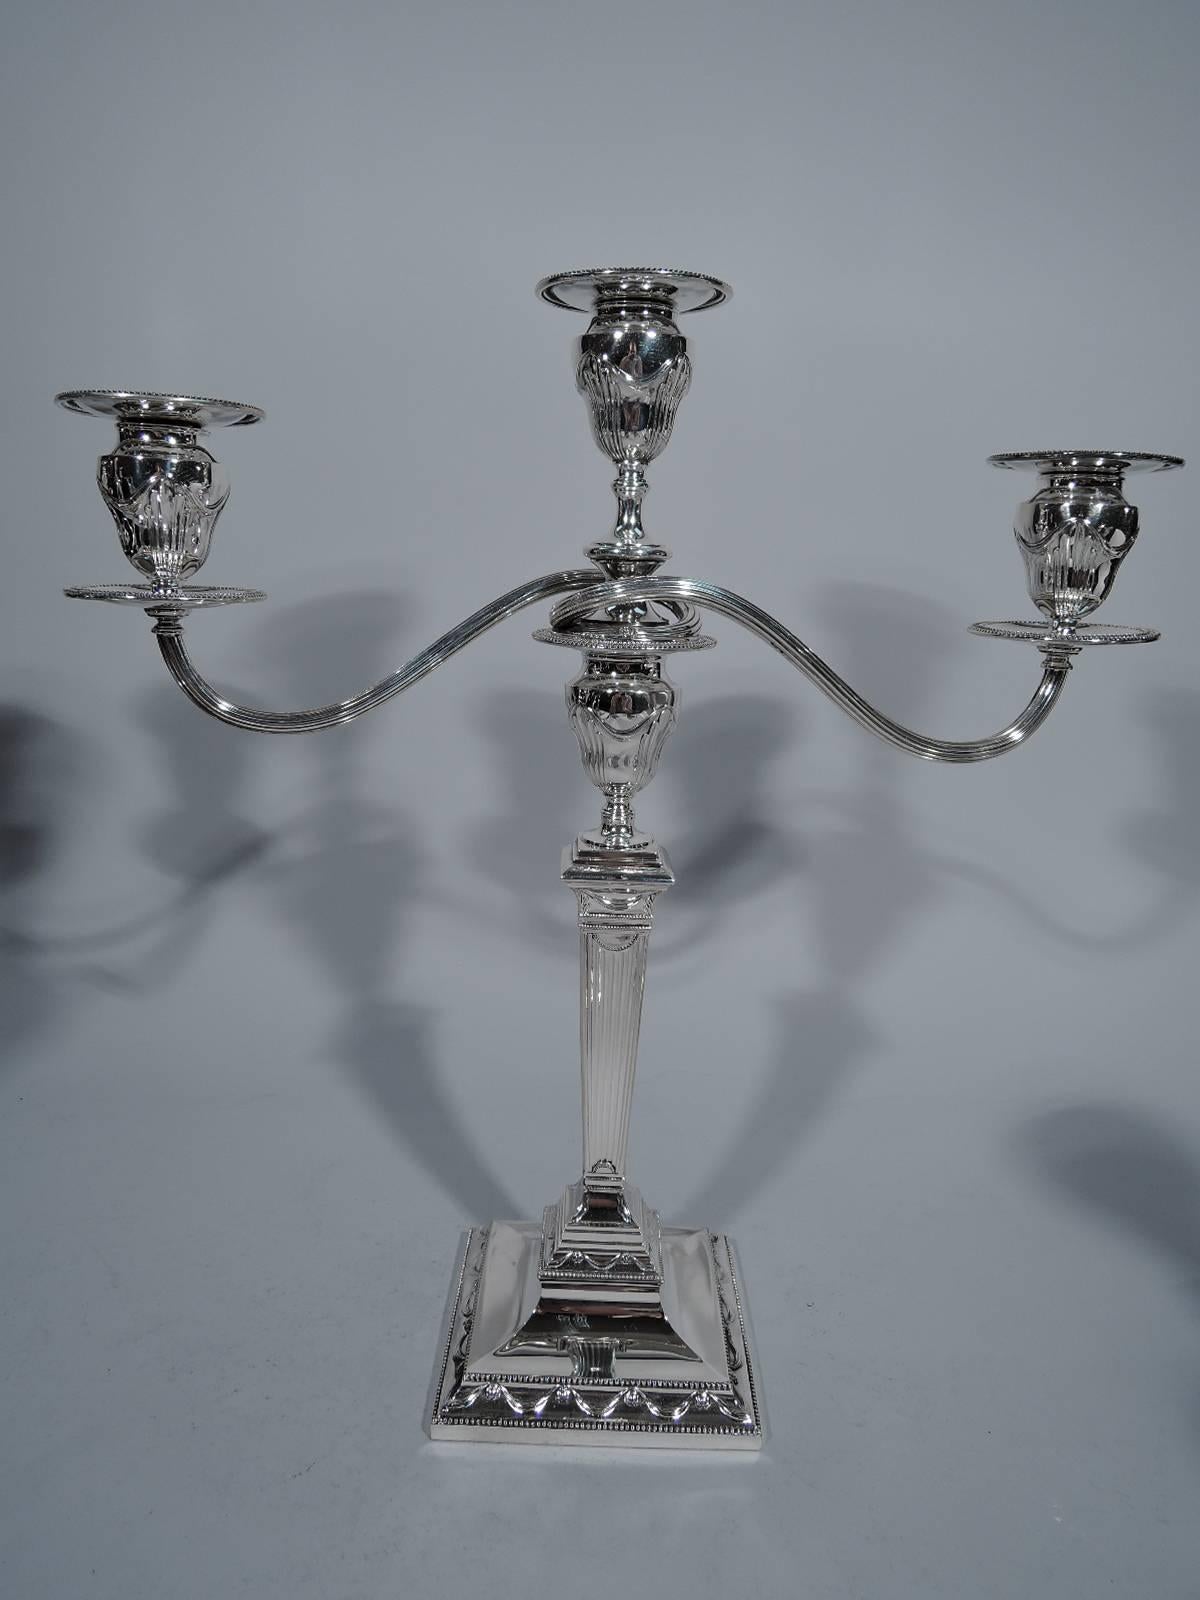 Neoclassical Revival Tiffany Sterling Silver Candelabra after English Neoclassical